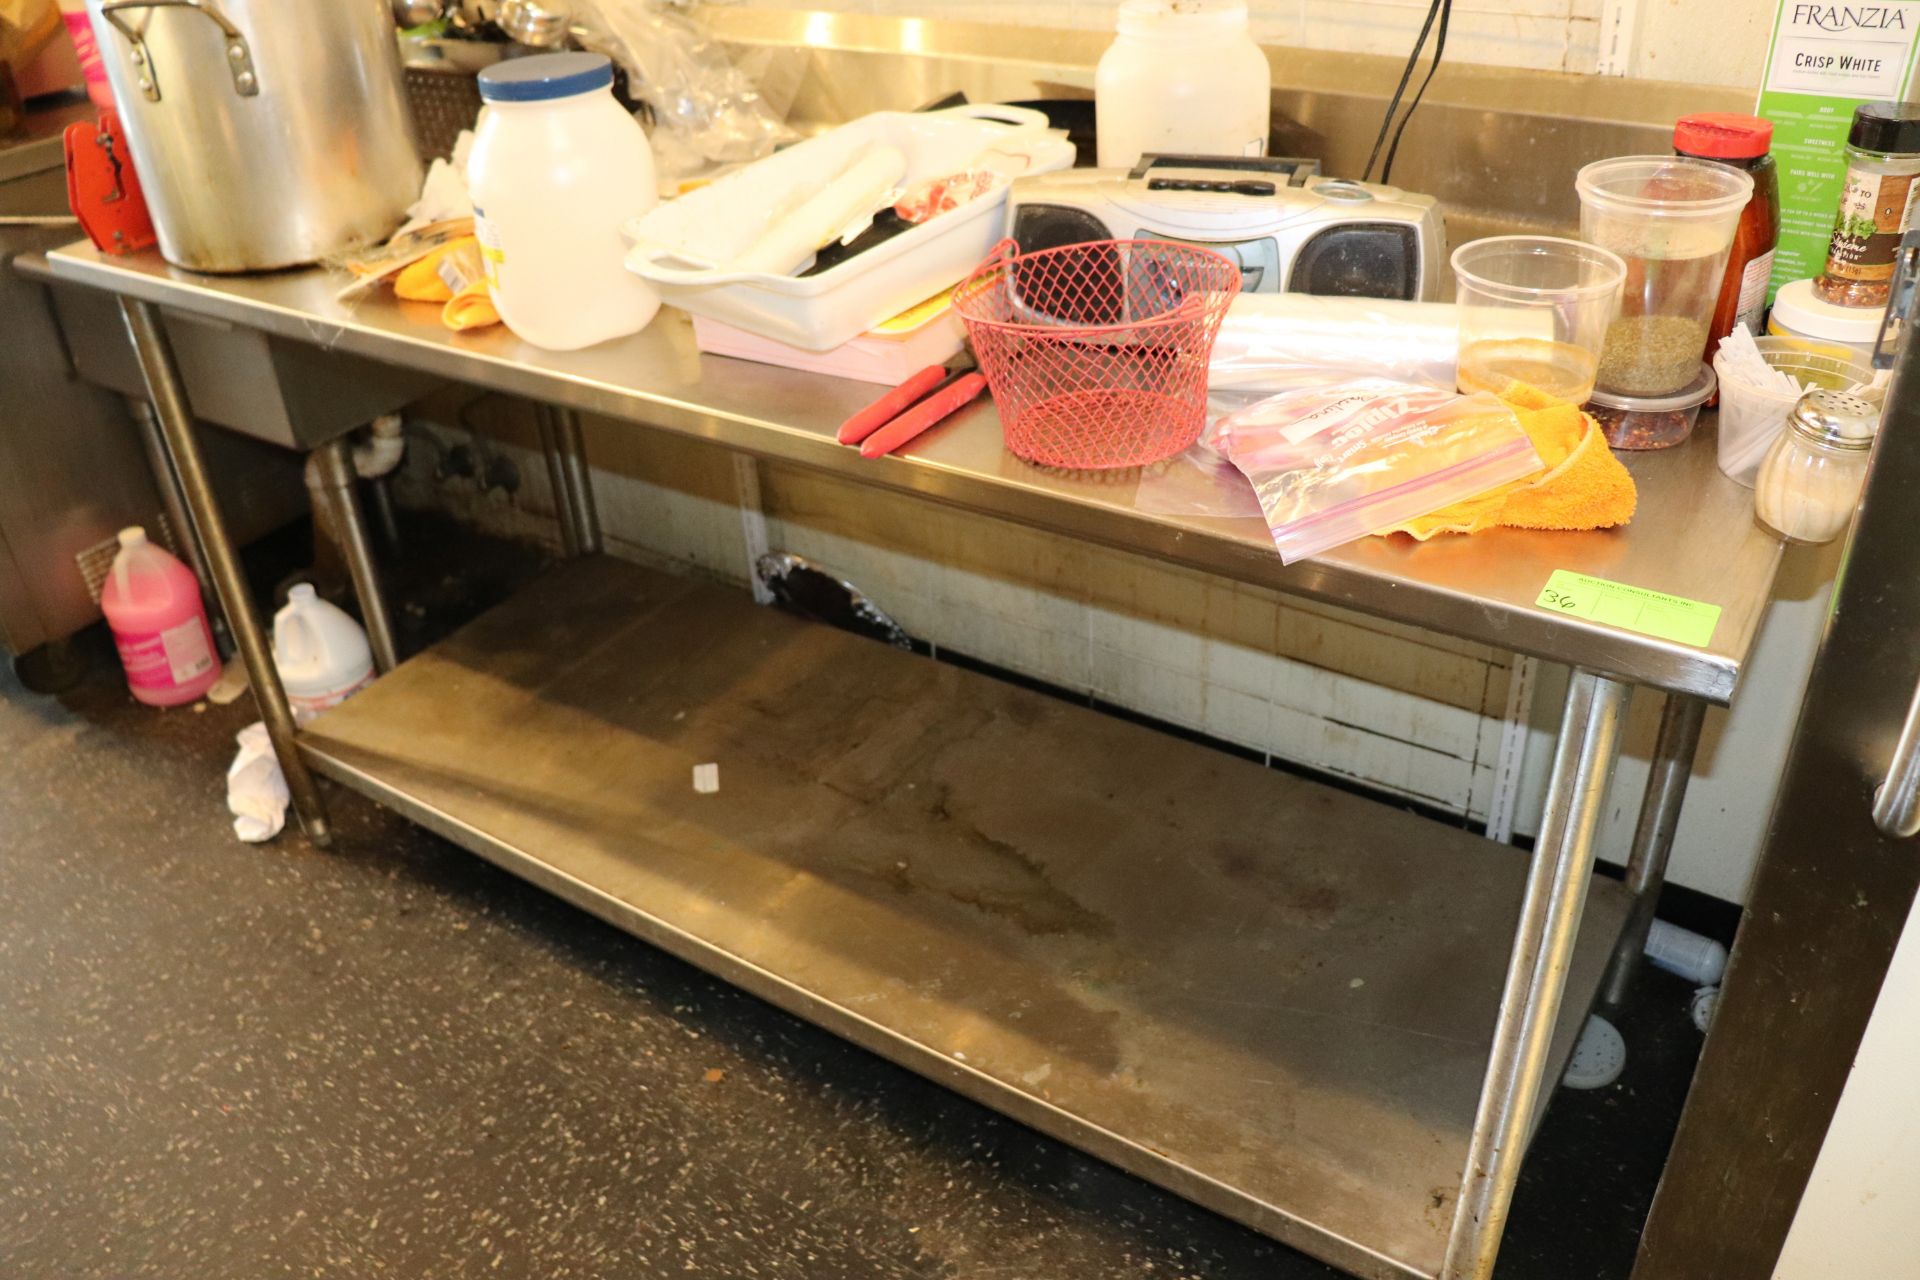 Stainless steel 6' prep table with backsplash and under shelf